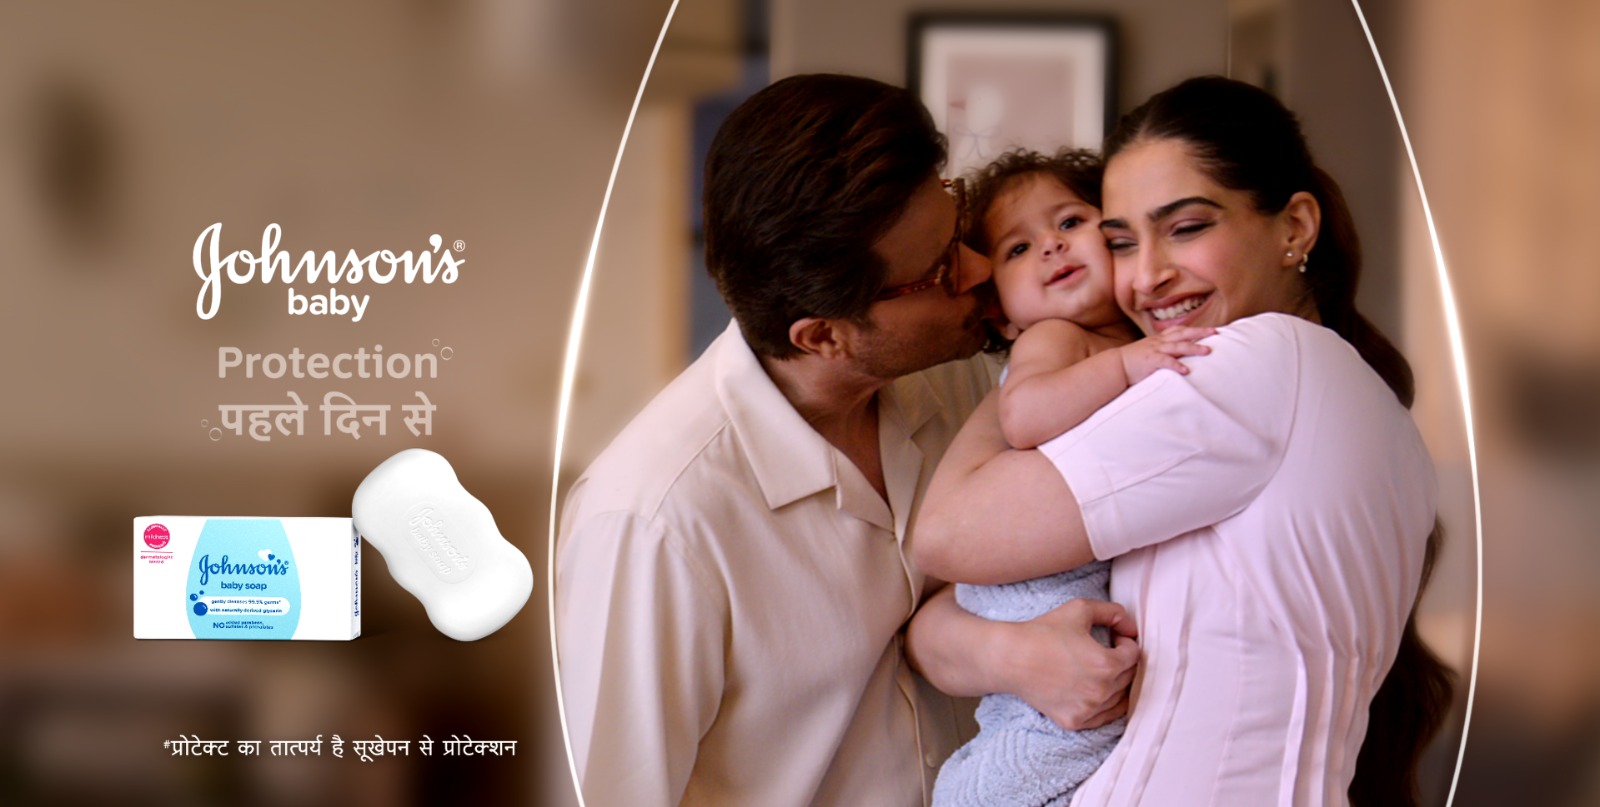 Anil and Sonam Kapoor Unite for Johnson's® Baby "Protection ka Promise Pehle Din Se"